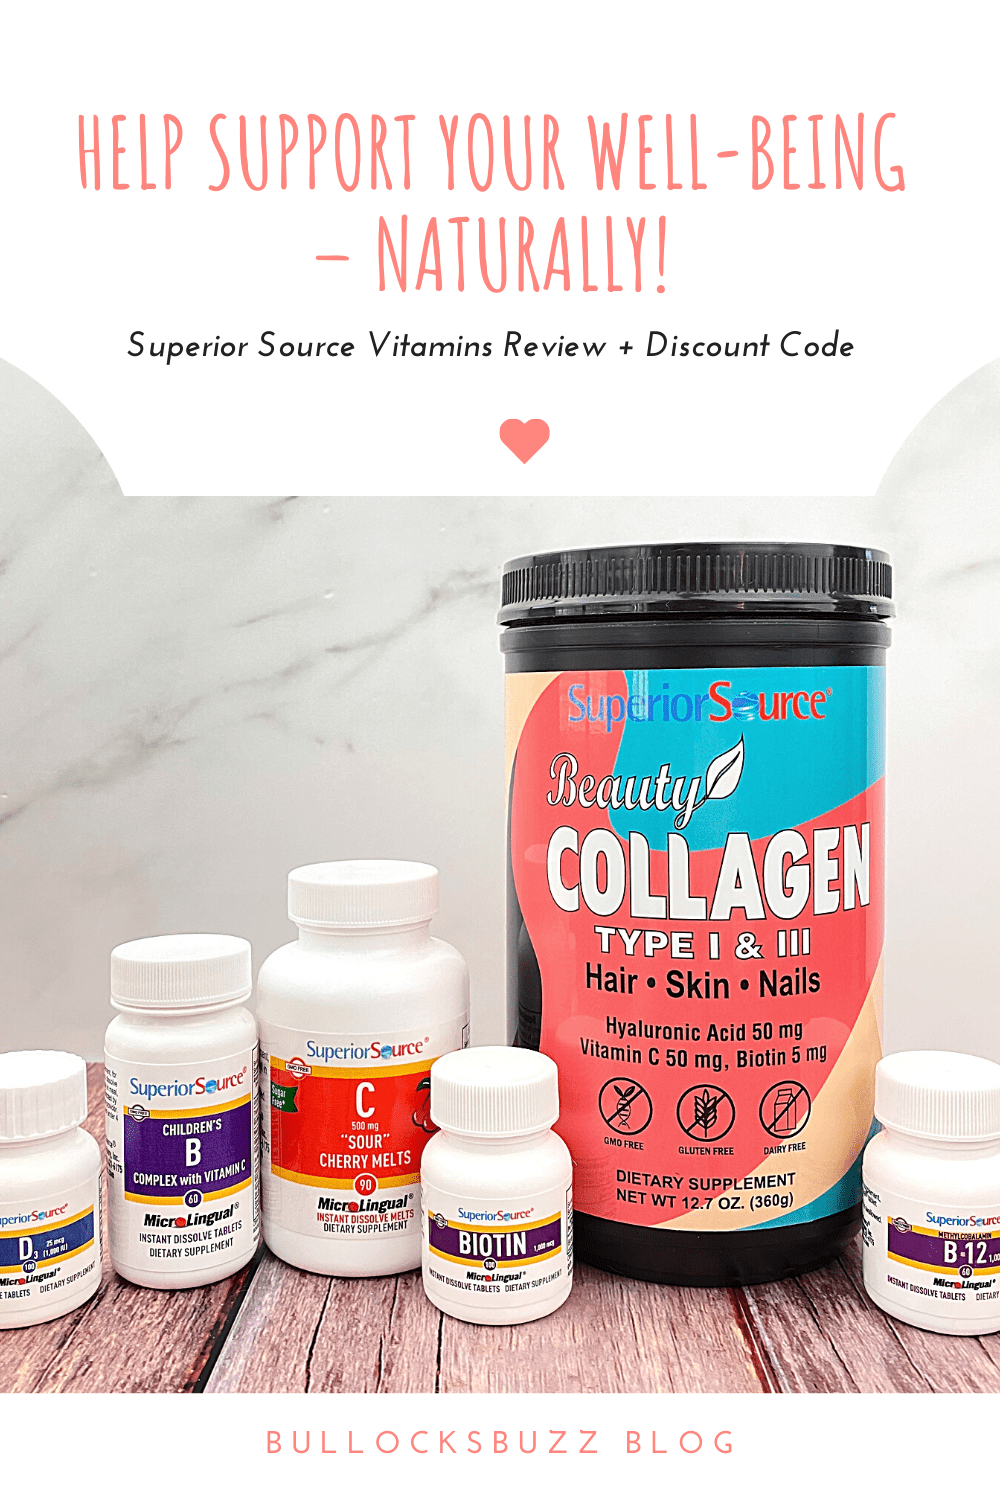 Health should never be a resolution, nor should it be abandoned. See how Superior Source vitamins can help support your well-being naturally. AD #SuperiorSource #CVC4Health #healthyliving #vitamins